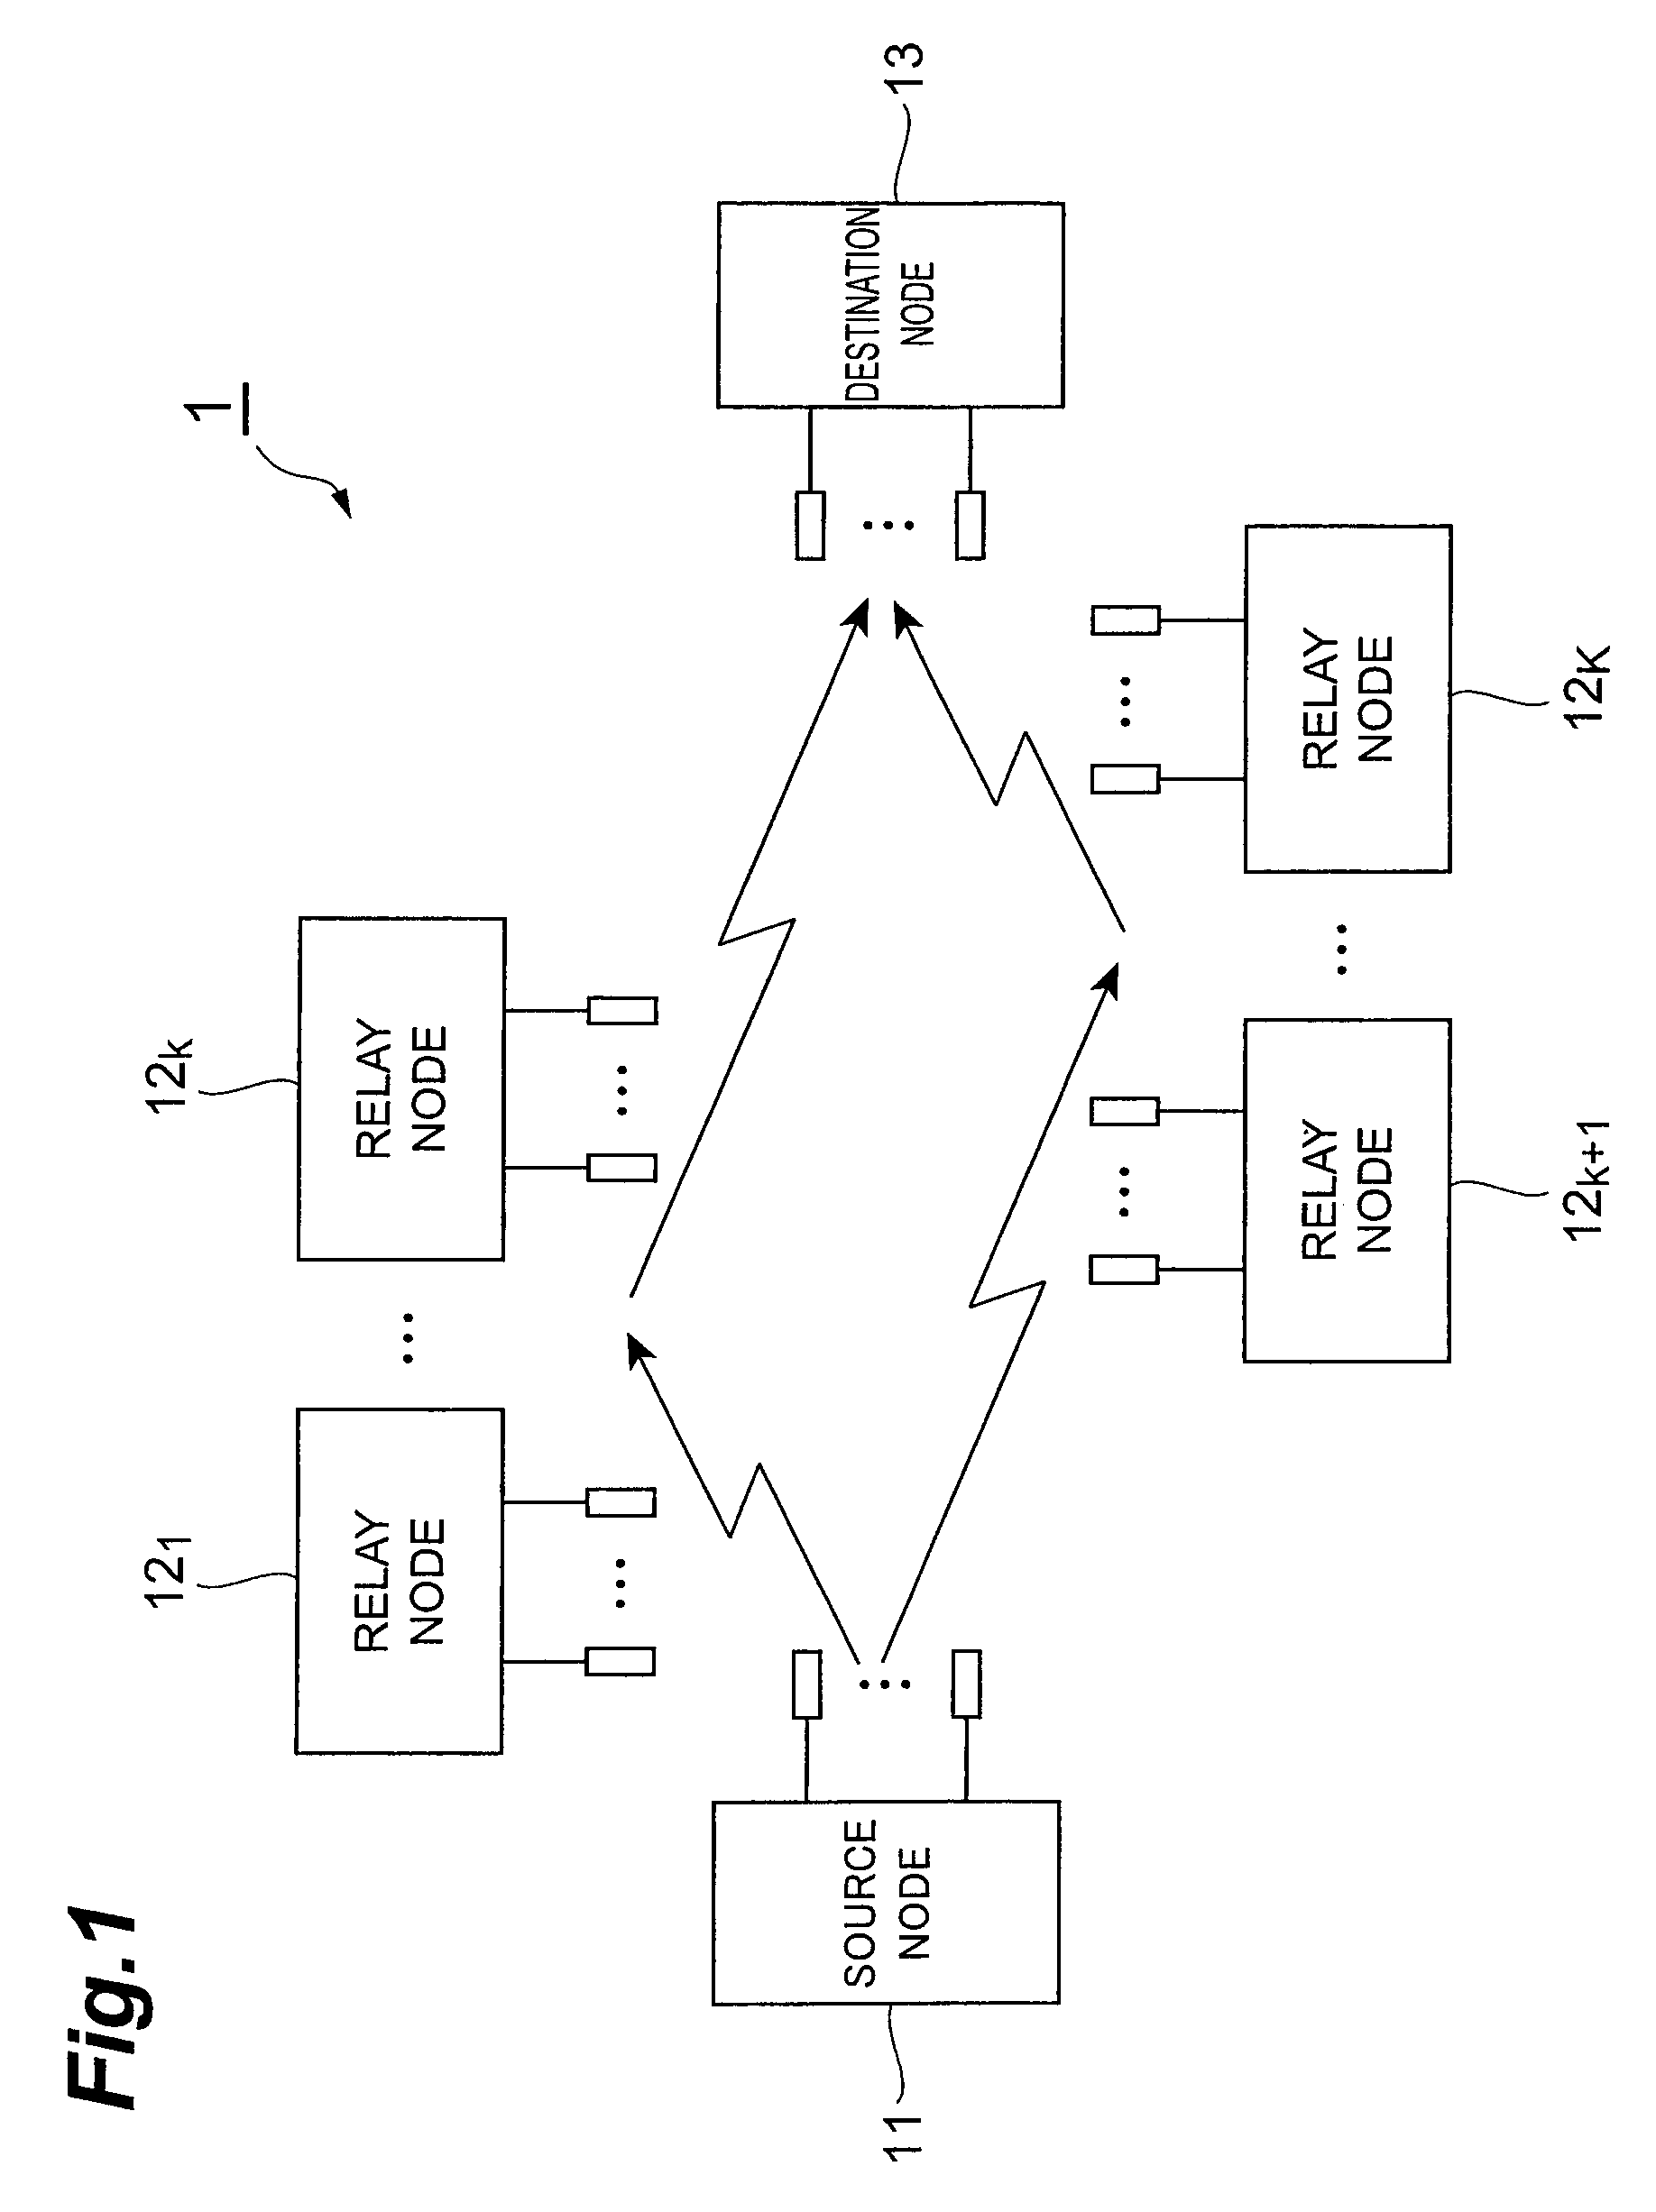 Relay node and relay method